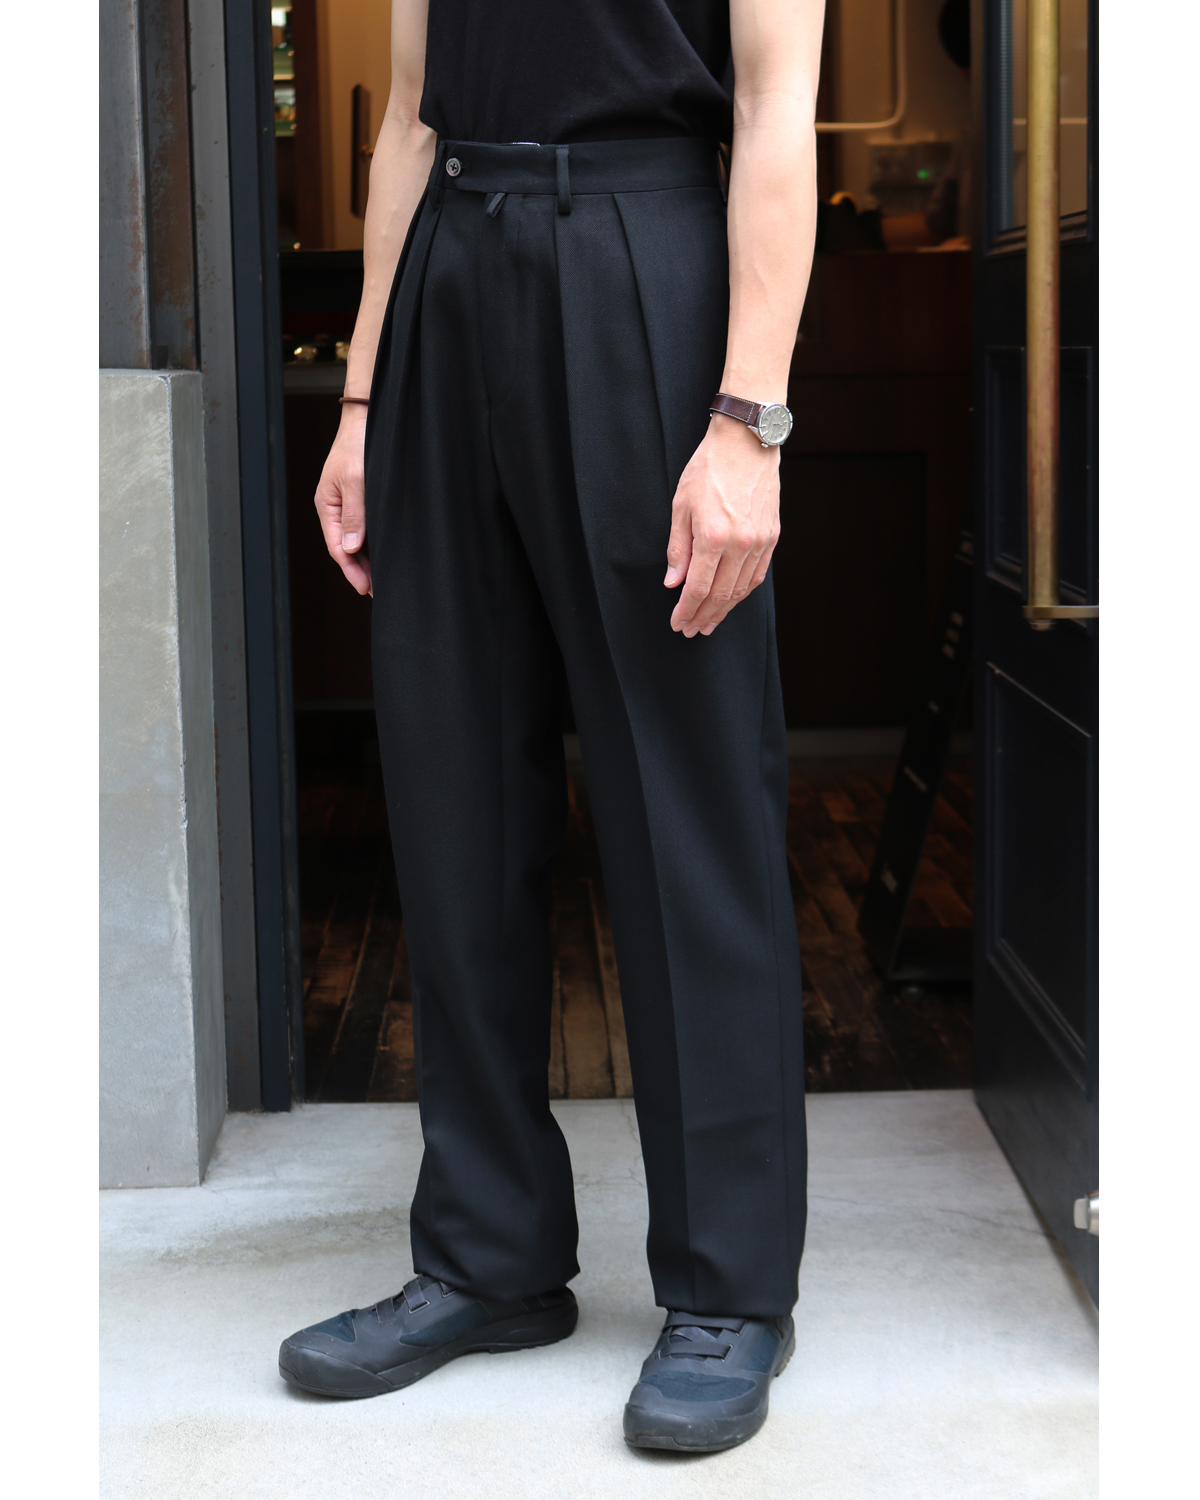 NEAT｜T/W Serge｜STANDARD - Black｜PRODUCT｜Continuer Inc.｜メガネ 